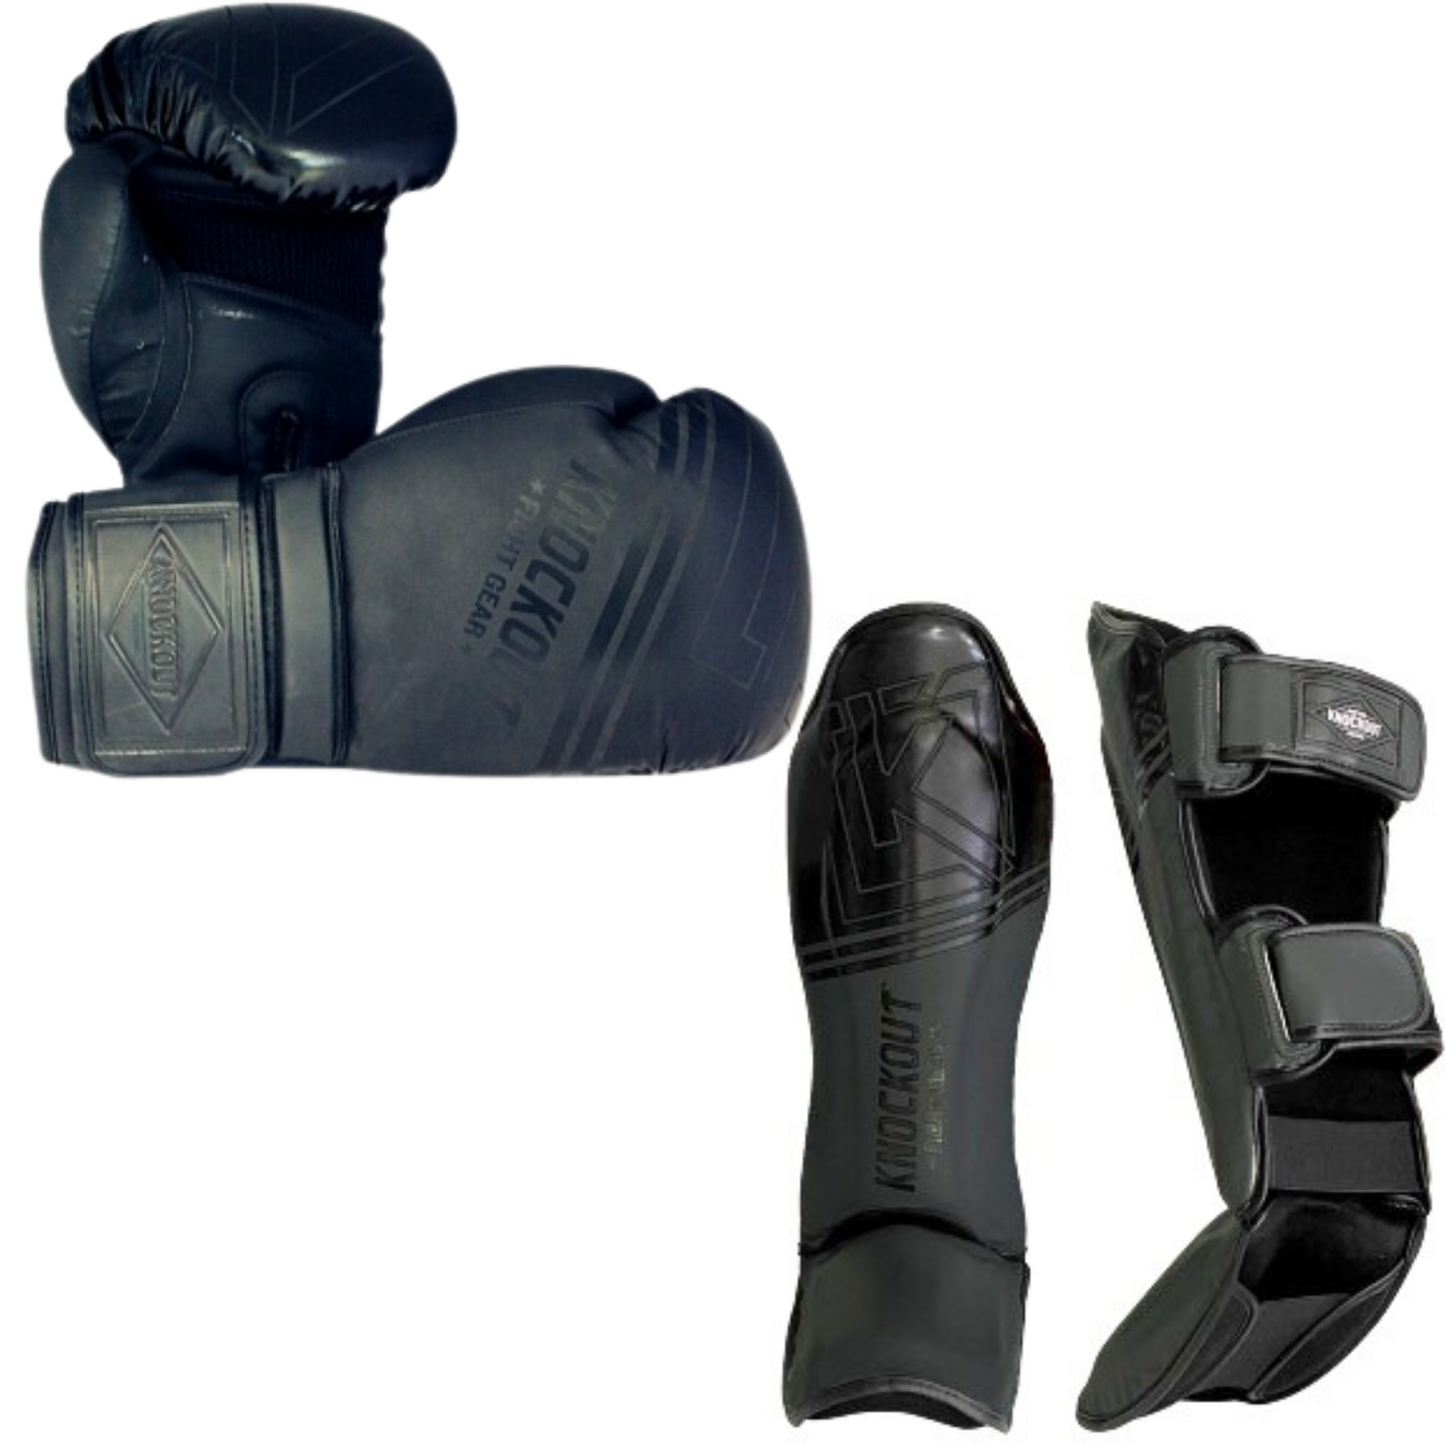 Boxing gloves and Muay Thai shin guards Complete Set, ideal for kickboxing, home gym training, and sparring, Best suited for MMA, featuring multi-layer padding and cushioning for enhanced protection